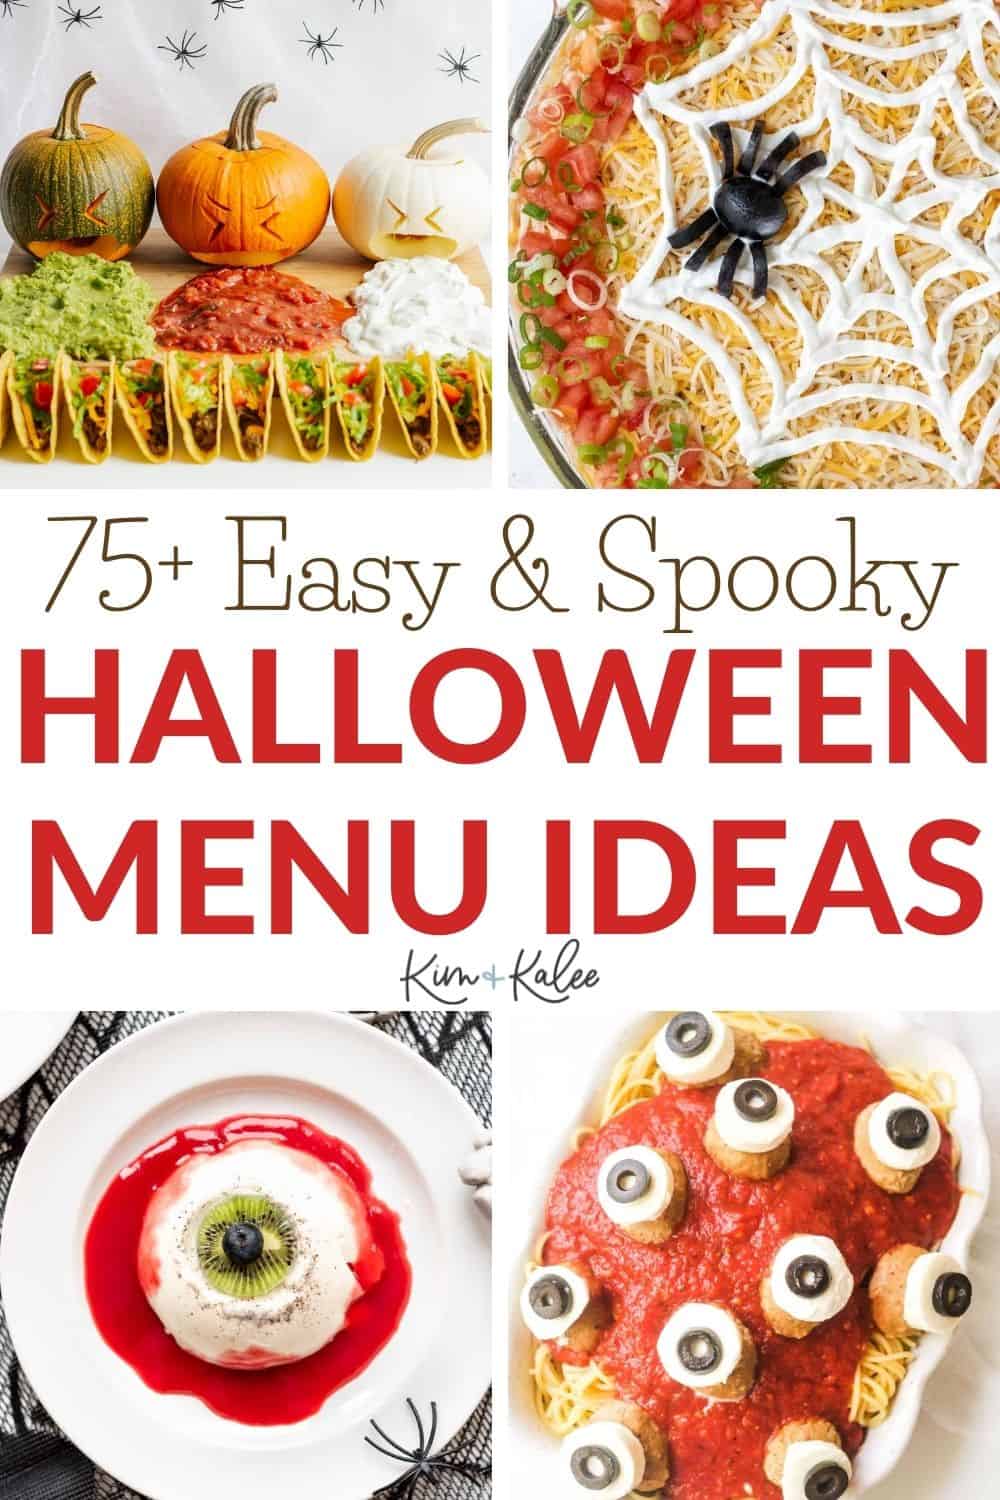 Collage of Halloween Food Ideas for Adults